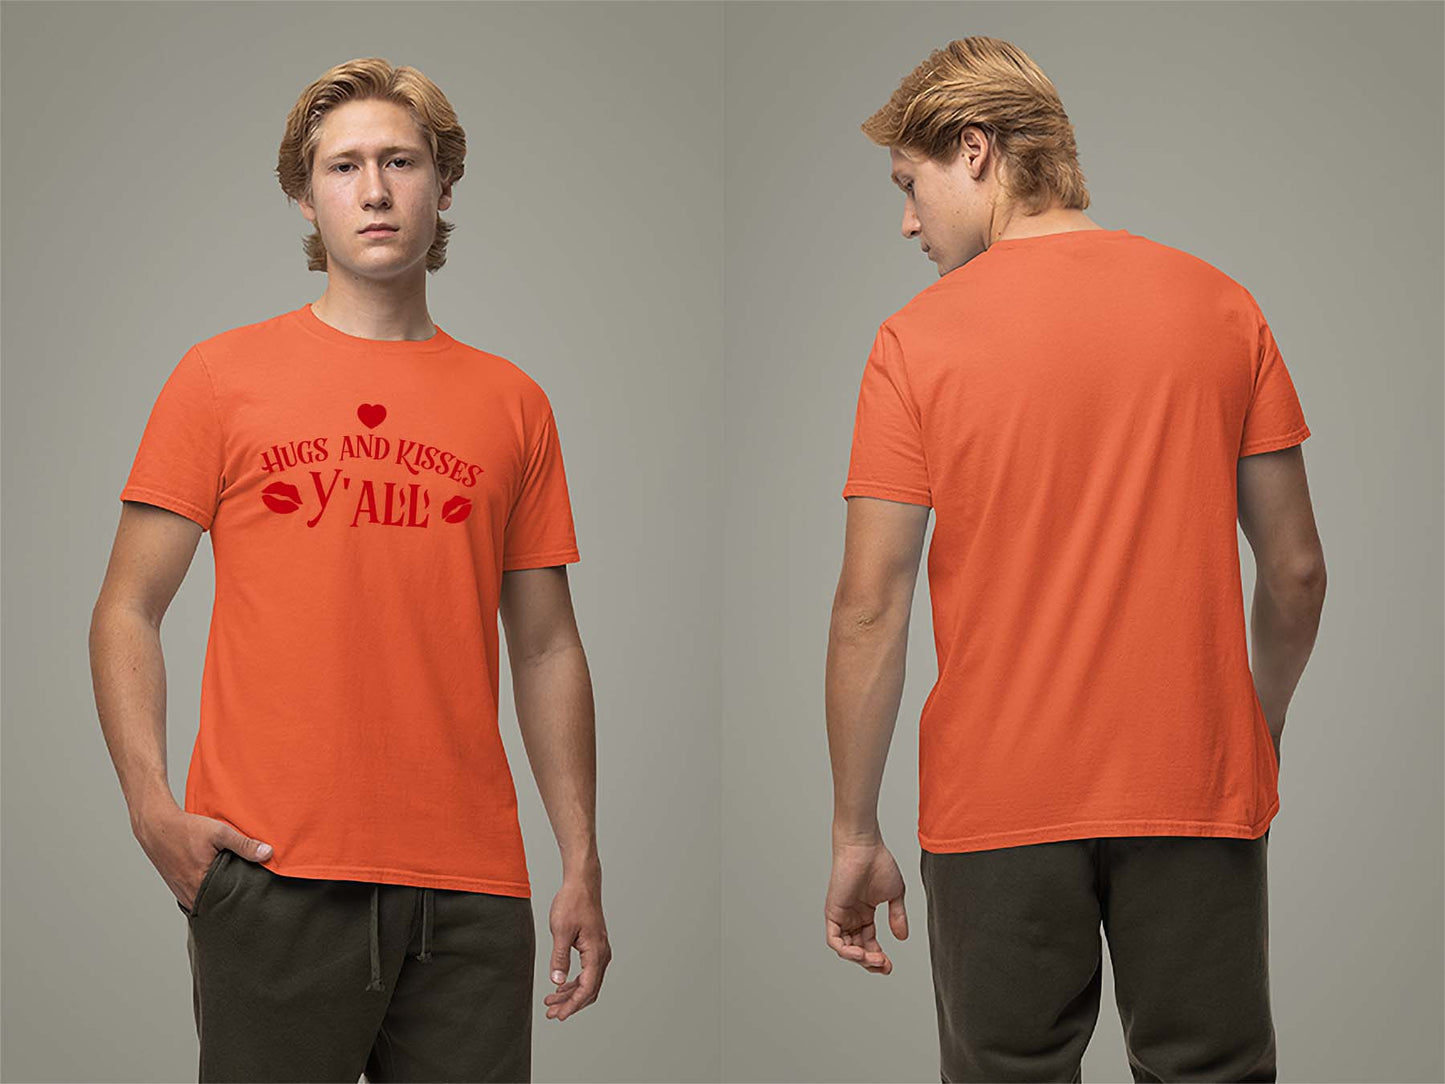 Fat Dave Hugs and Kisses Y'all T-Shirt Small Orange